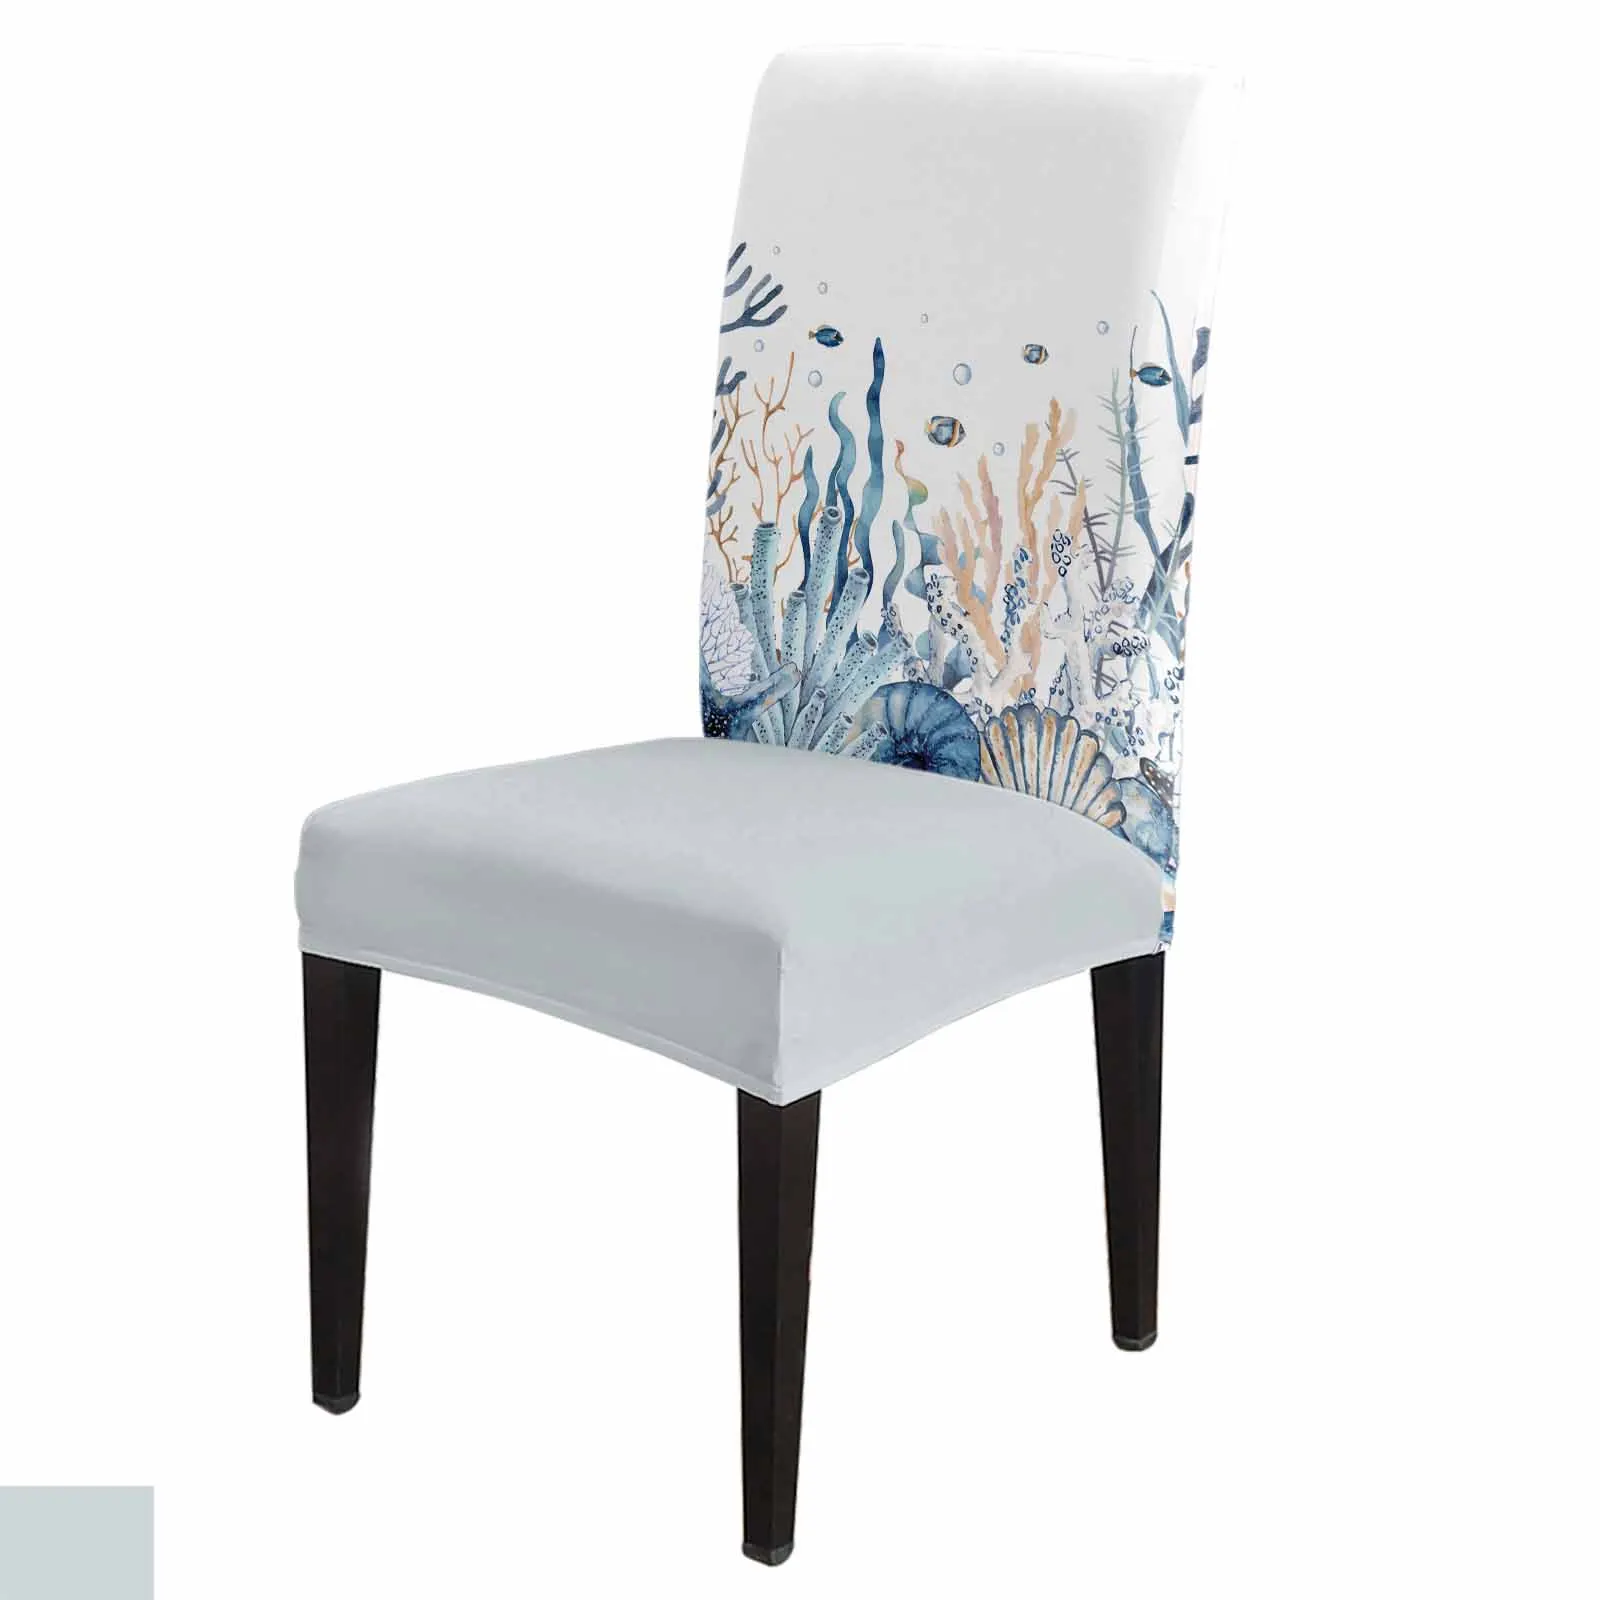 

Summer Ocean Coral Seaweed Dining Chair Covers Spandex Stretch Seat Cover for Wedding Kitchen Banquet Party Seat Case